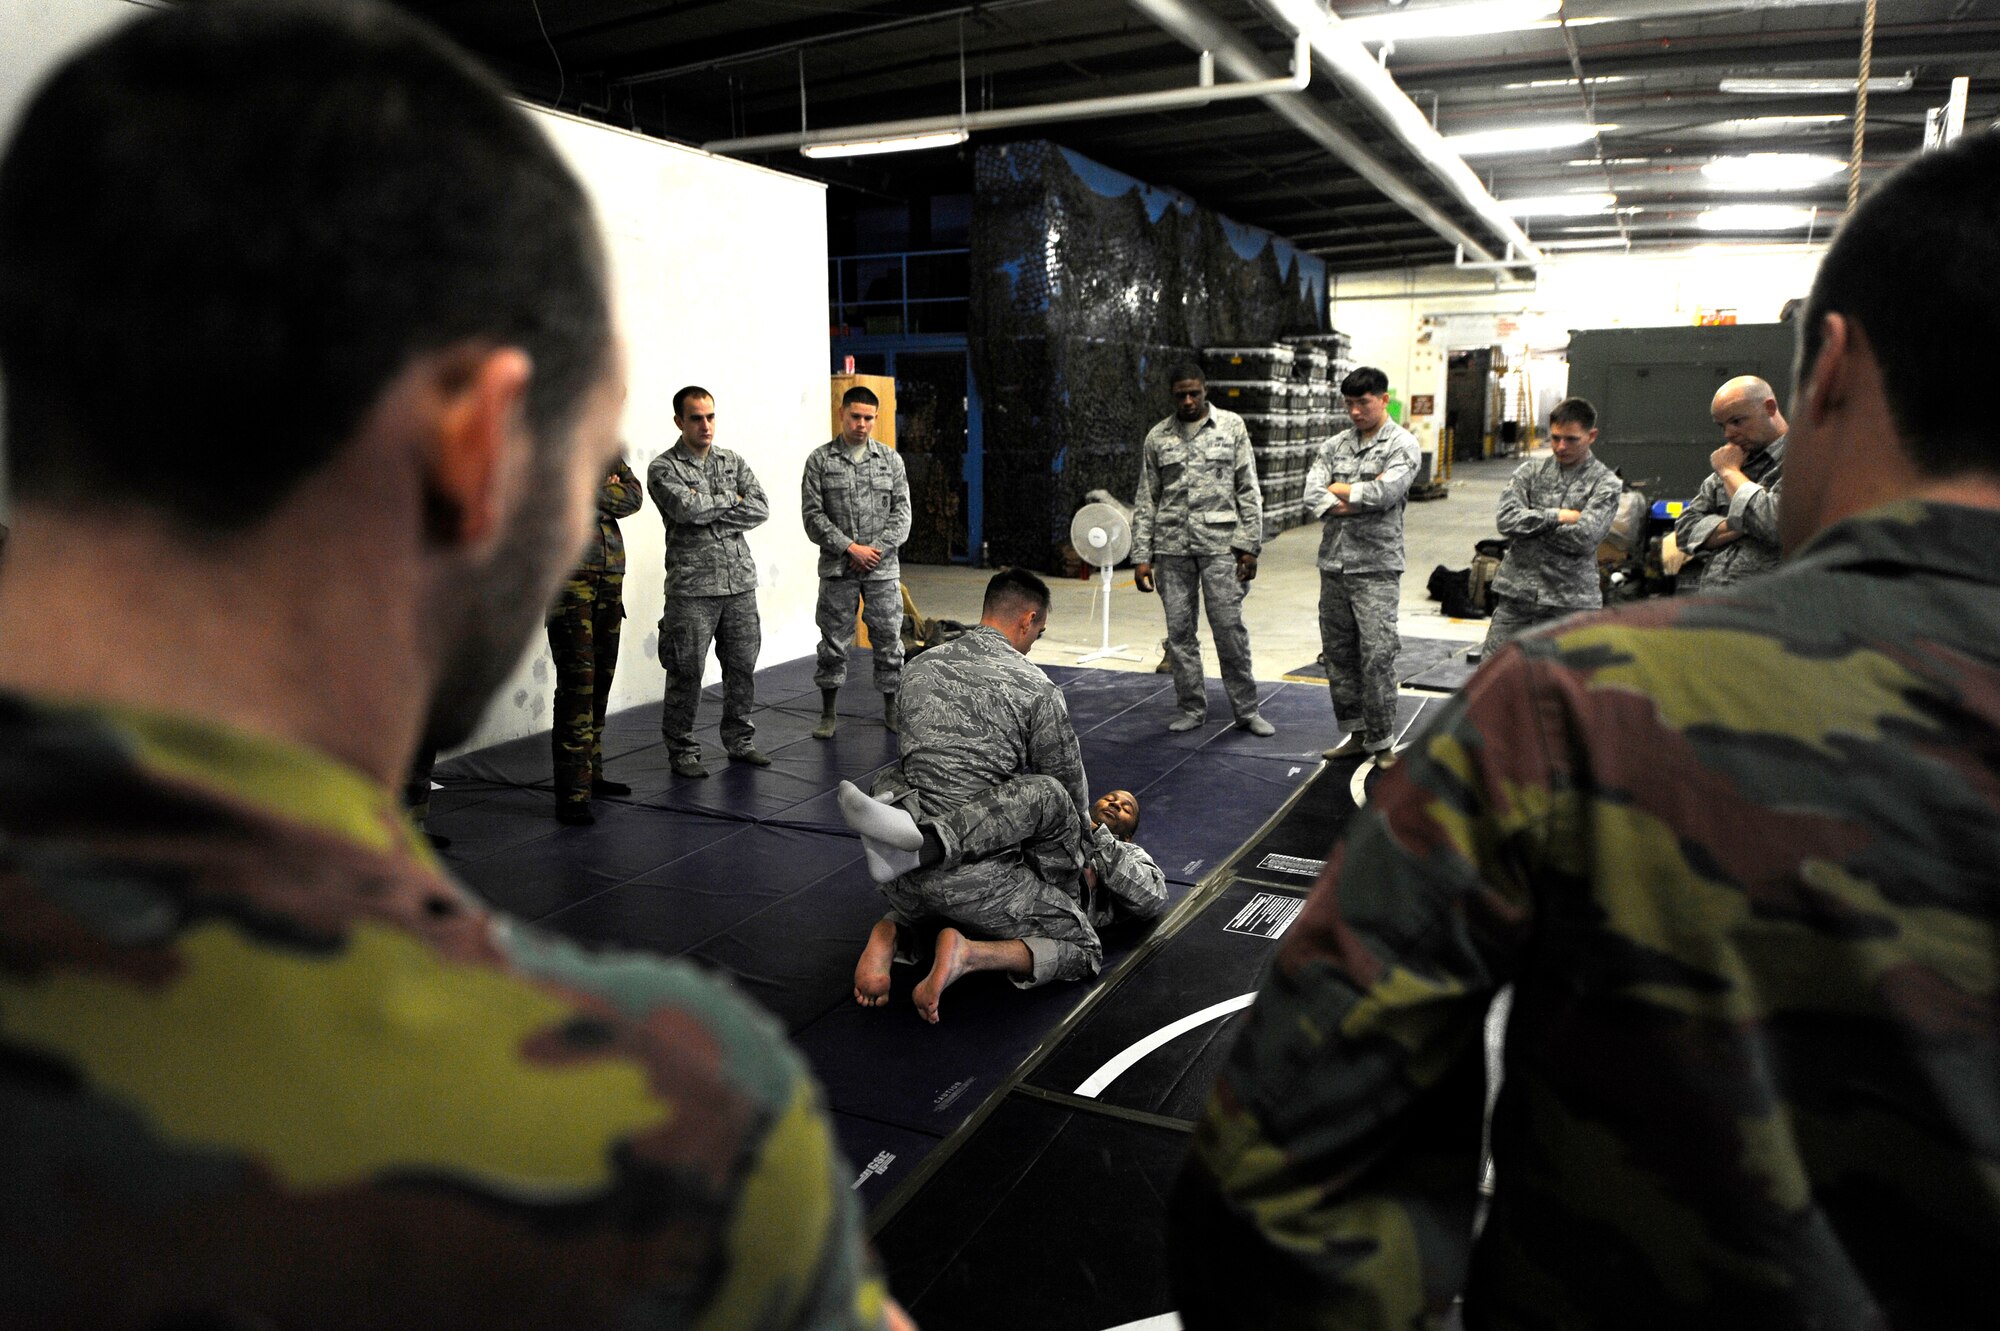 Air Force Staff Sgt. Christopher Whiting and Air Force Staff Sgt. Daniel Weisel, 435th Security Forces Squadron Creek Defender instructors, demonstrate their modified army combative technique during a flyaway security team practice session Dec. 07, 2011, Ramstein Air Base, Germany.  As part of the 435th wing's Contingency Response Group, the 435th SFS contributes to the group's "open the base" mission, as well as expeditionary combat support training through the USAFE Security Forces Regional Training Center's Creek Defender course. (U.S. Air Force photo by Staff Sgt. Chris Willis)